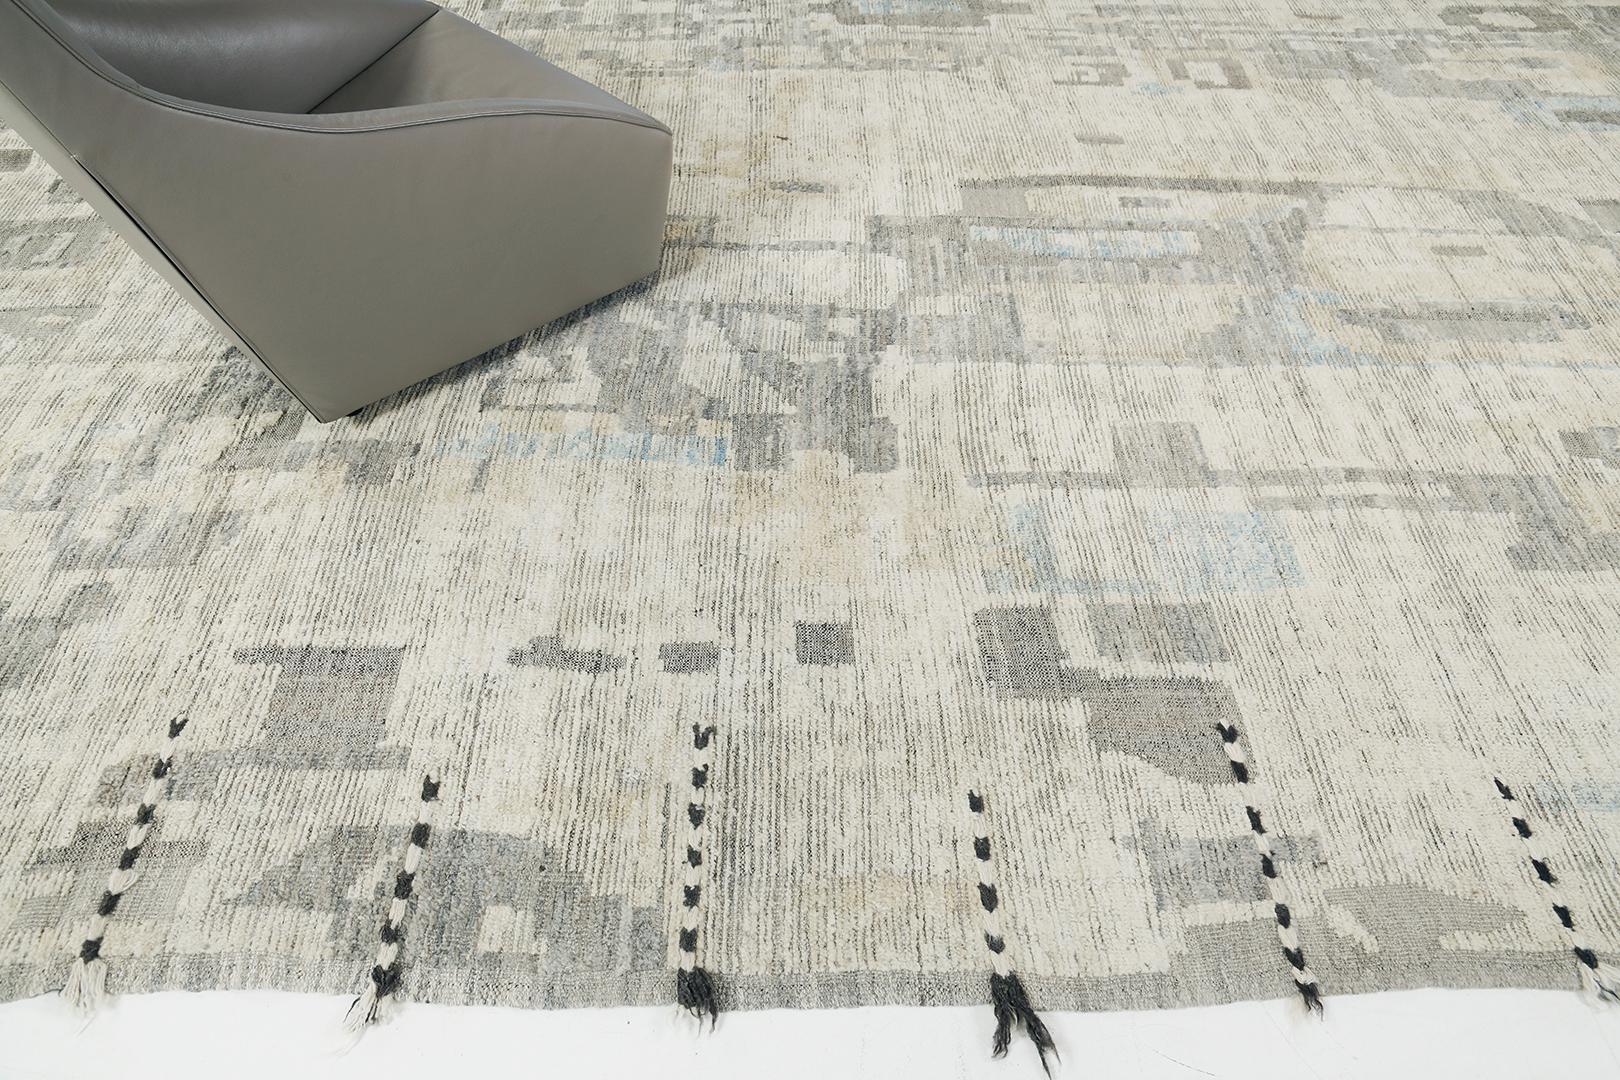 Characterized by playful ambiguous elements, Awsim’ displays beautiful earthy shades that bring out its fascinating aesthetic appeal. The depth and meaning presented on this wonderful rug makes one a perfect addition to contemporary interiors.